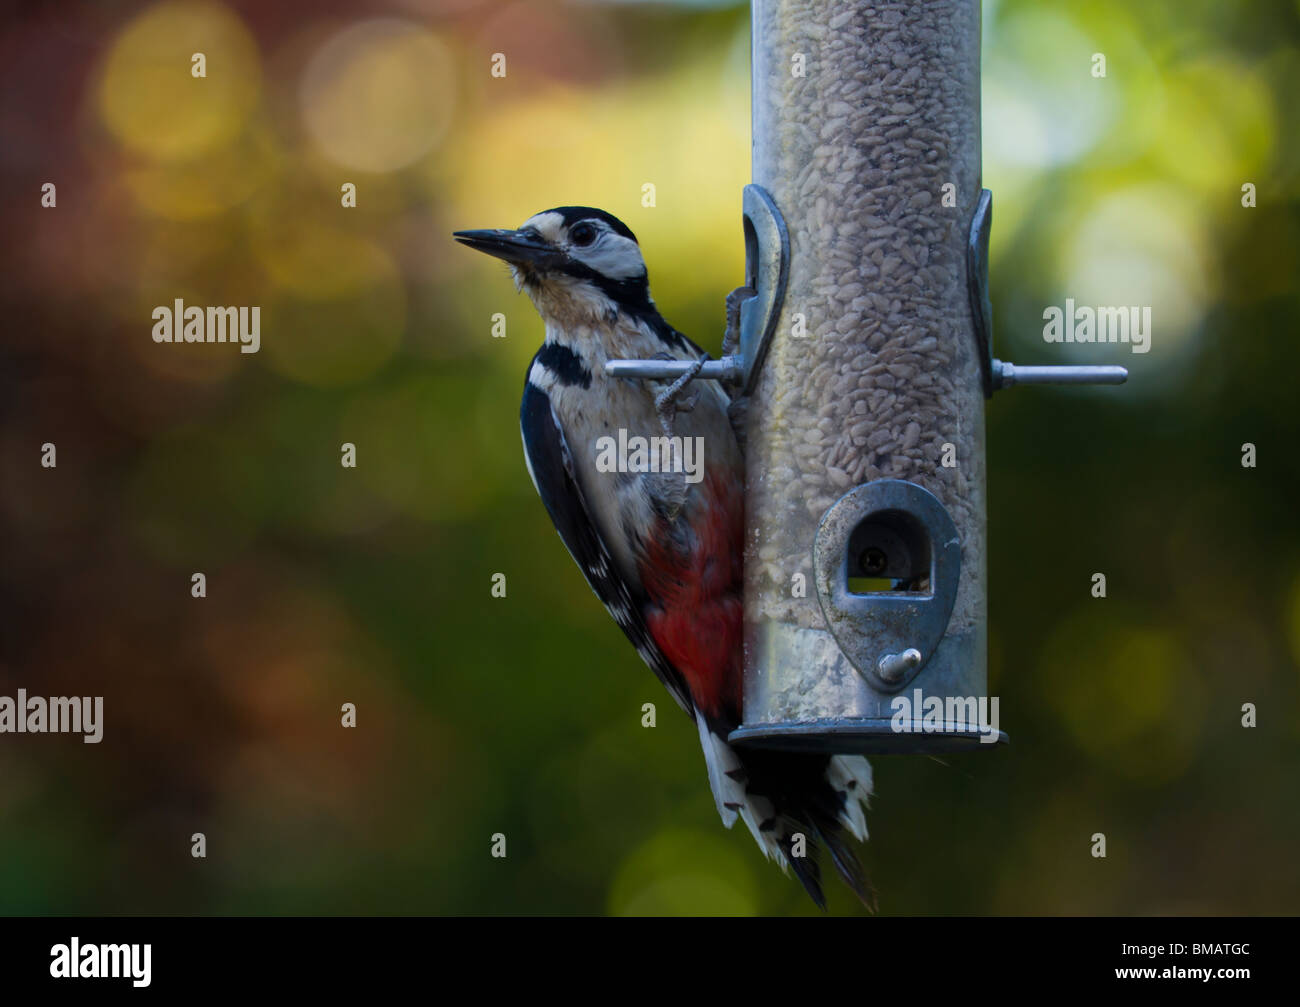 Greater spotted woodpecker feeding on a bird seed feeder. Stock Photo